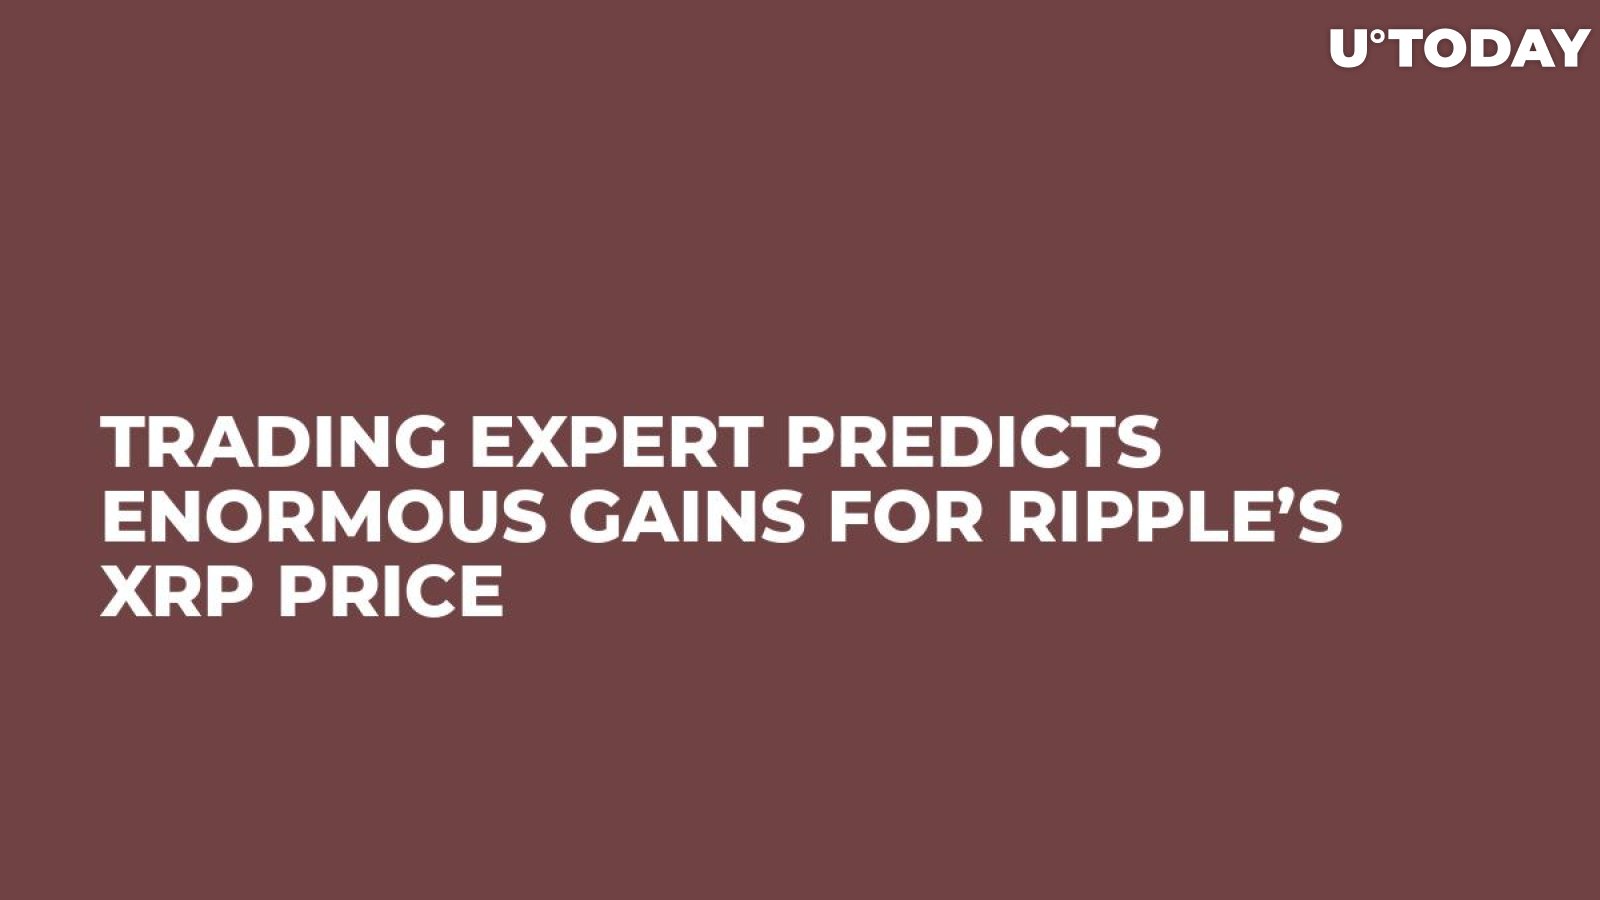 Trading Expert Predicts Enormous Gains for Ripple’s XRP Price